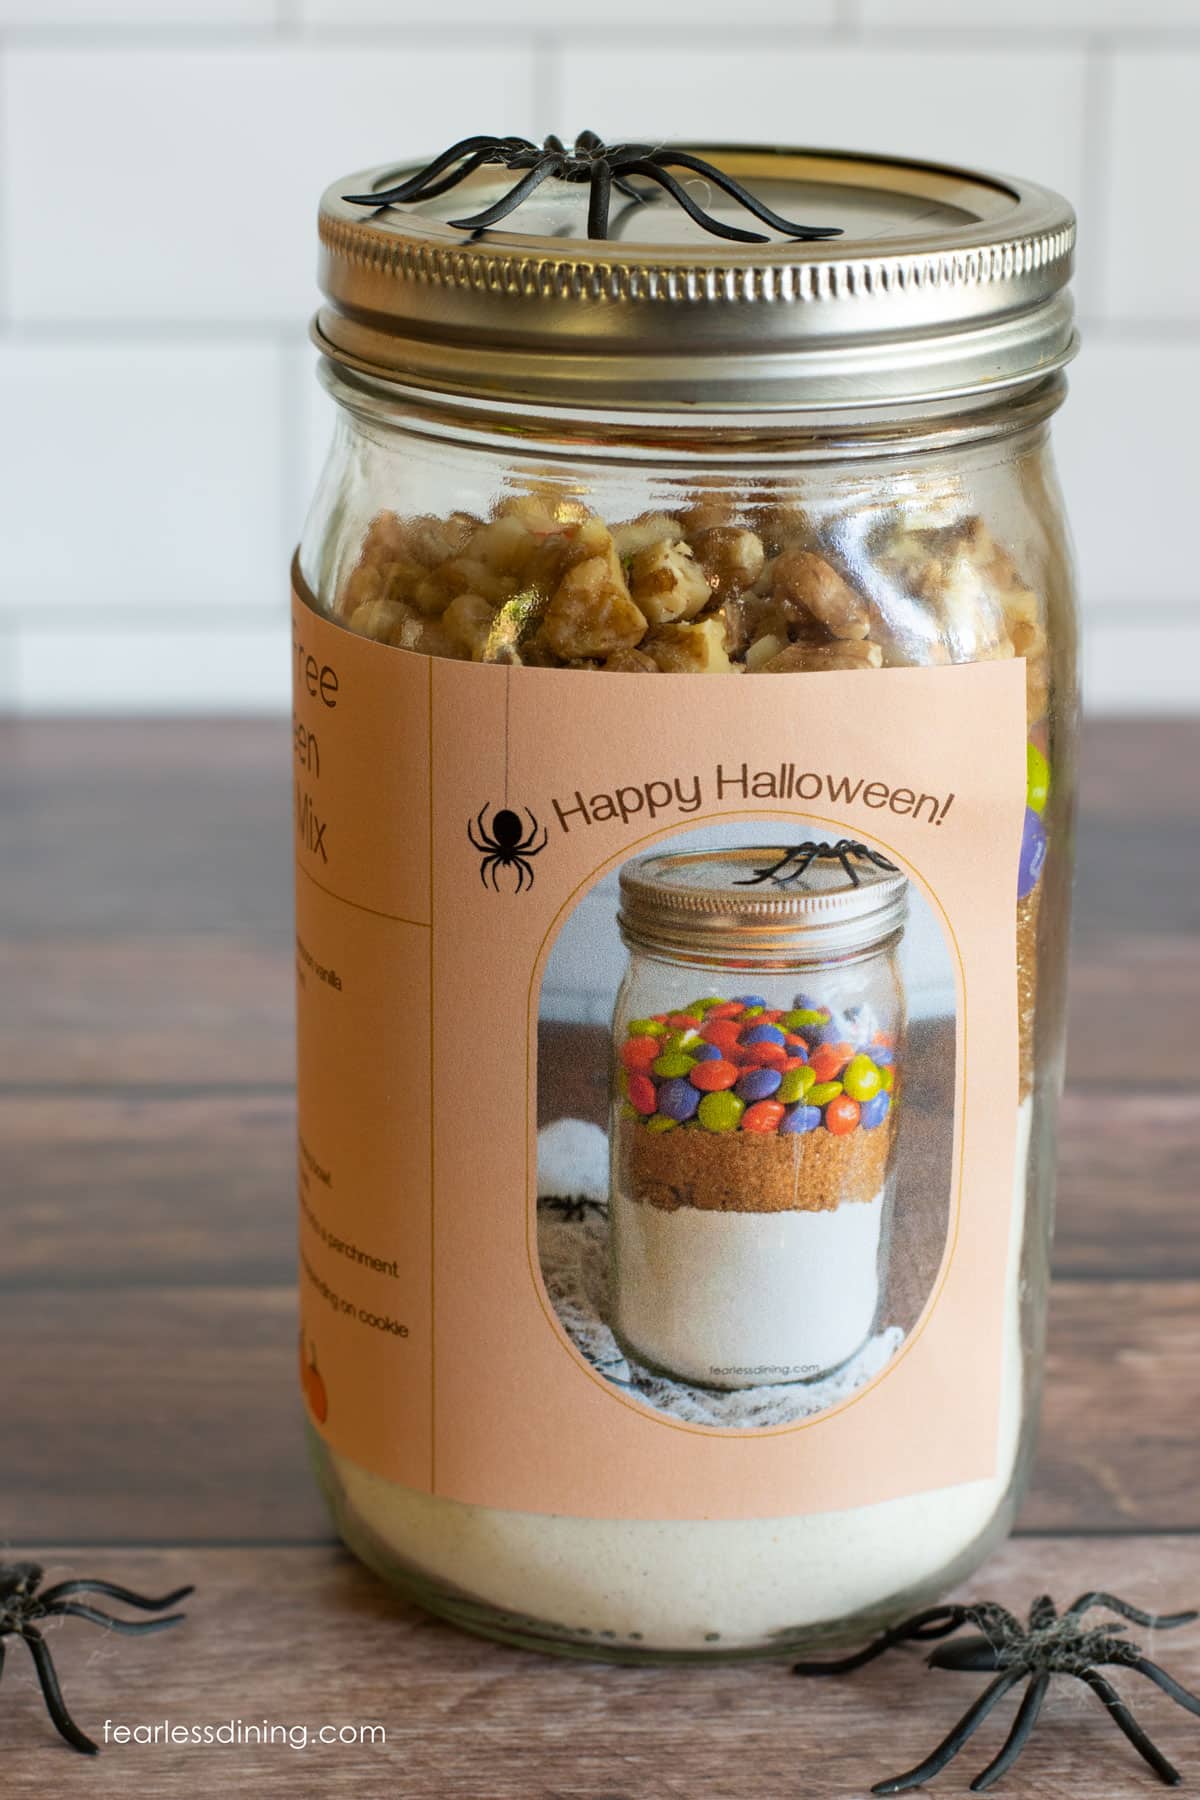 A mason jar with a recipe label for Halloween.